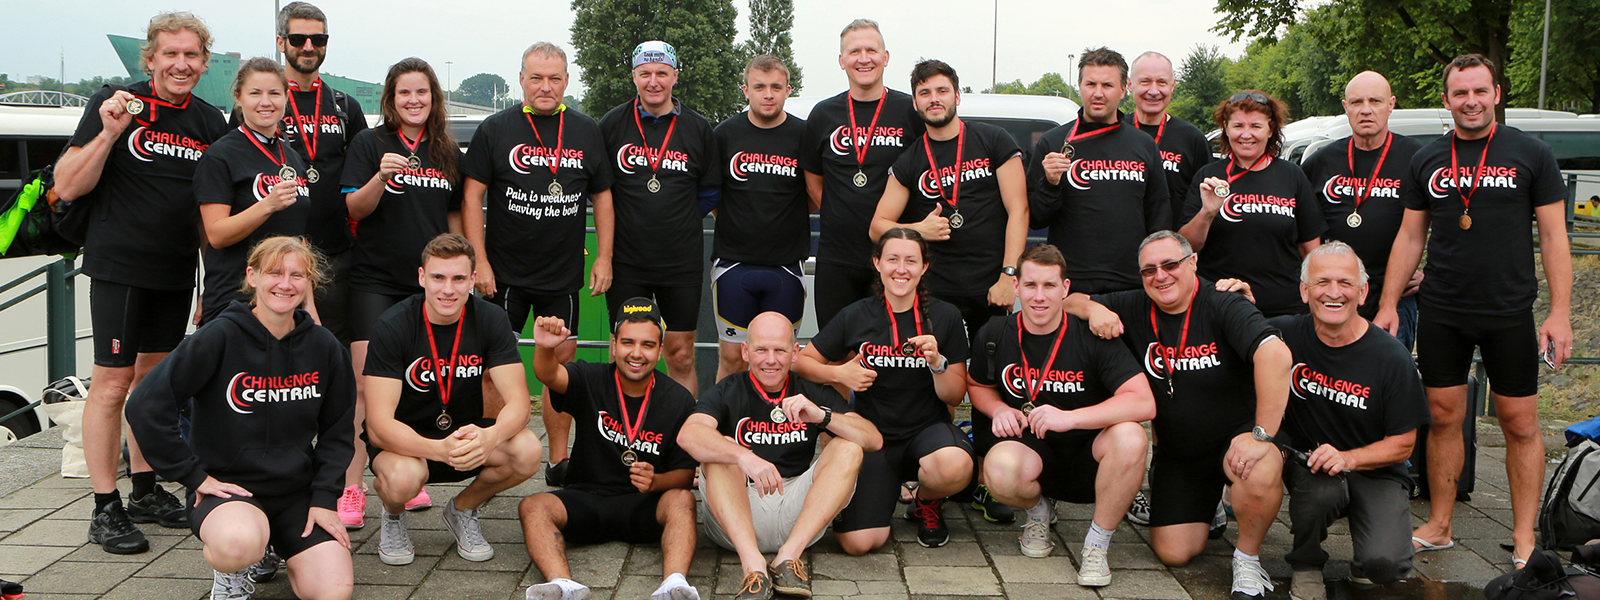 London to Amsterdam with Challenge Central